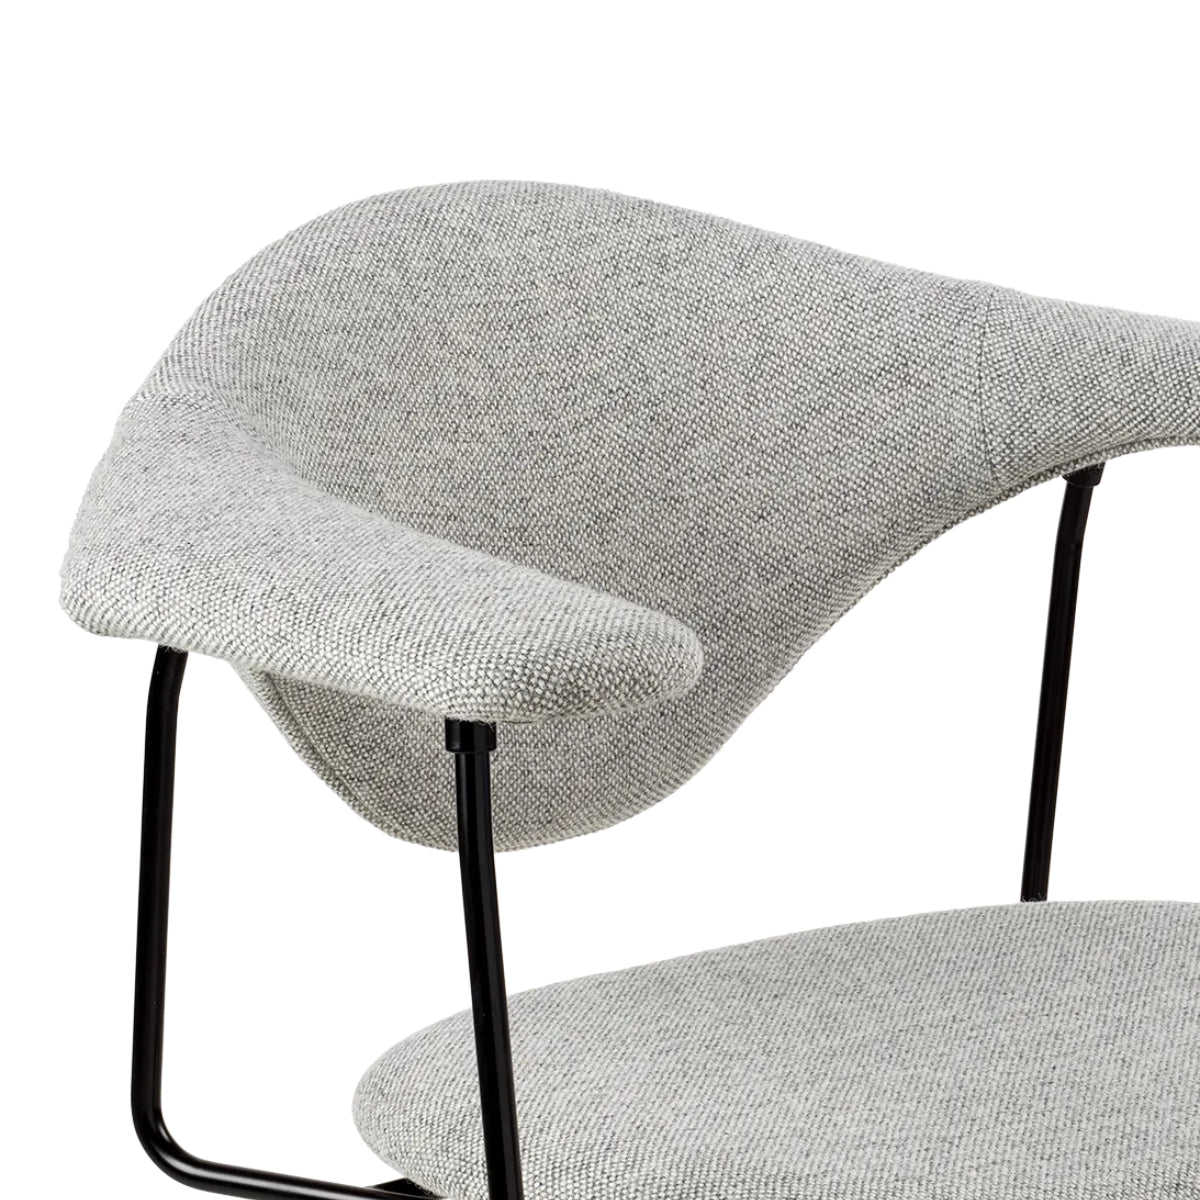 GUBI | Masculo Meeting Chair – Fully Upholstered